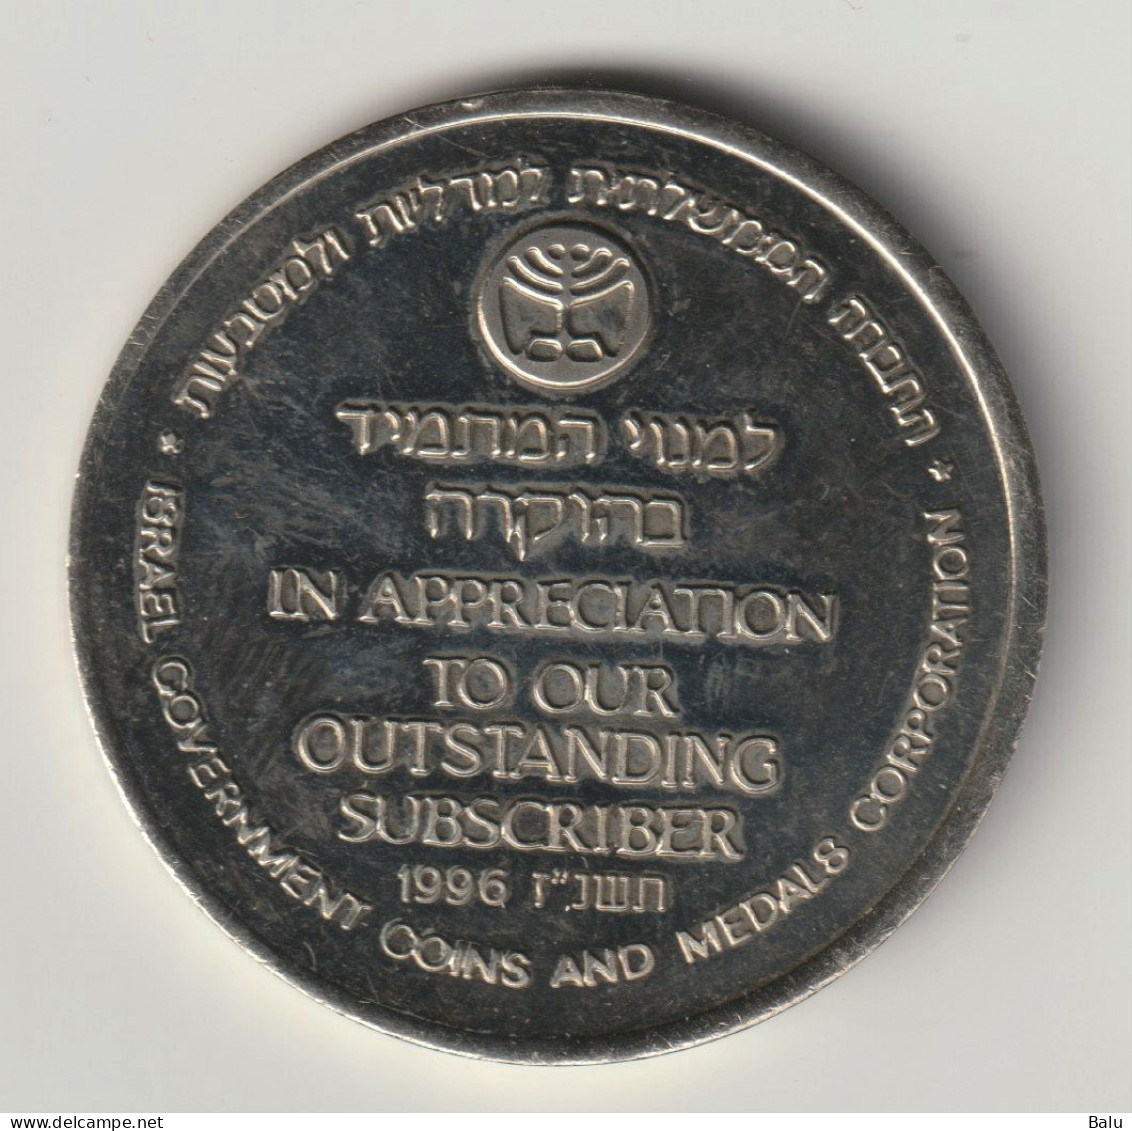 1996 Medaille. Israel. In Appreciation To Our Outstanding Subscribers. ... And The Bush Was Not Consumed - Israele